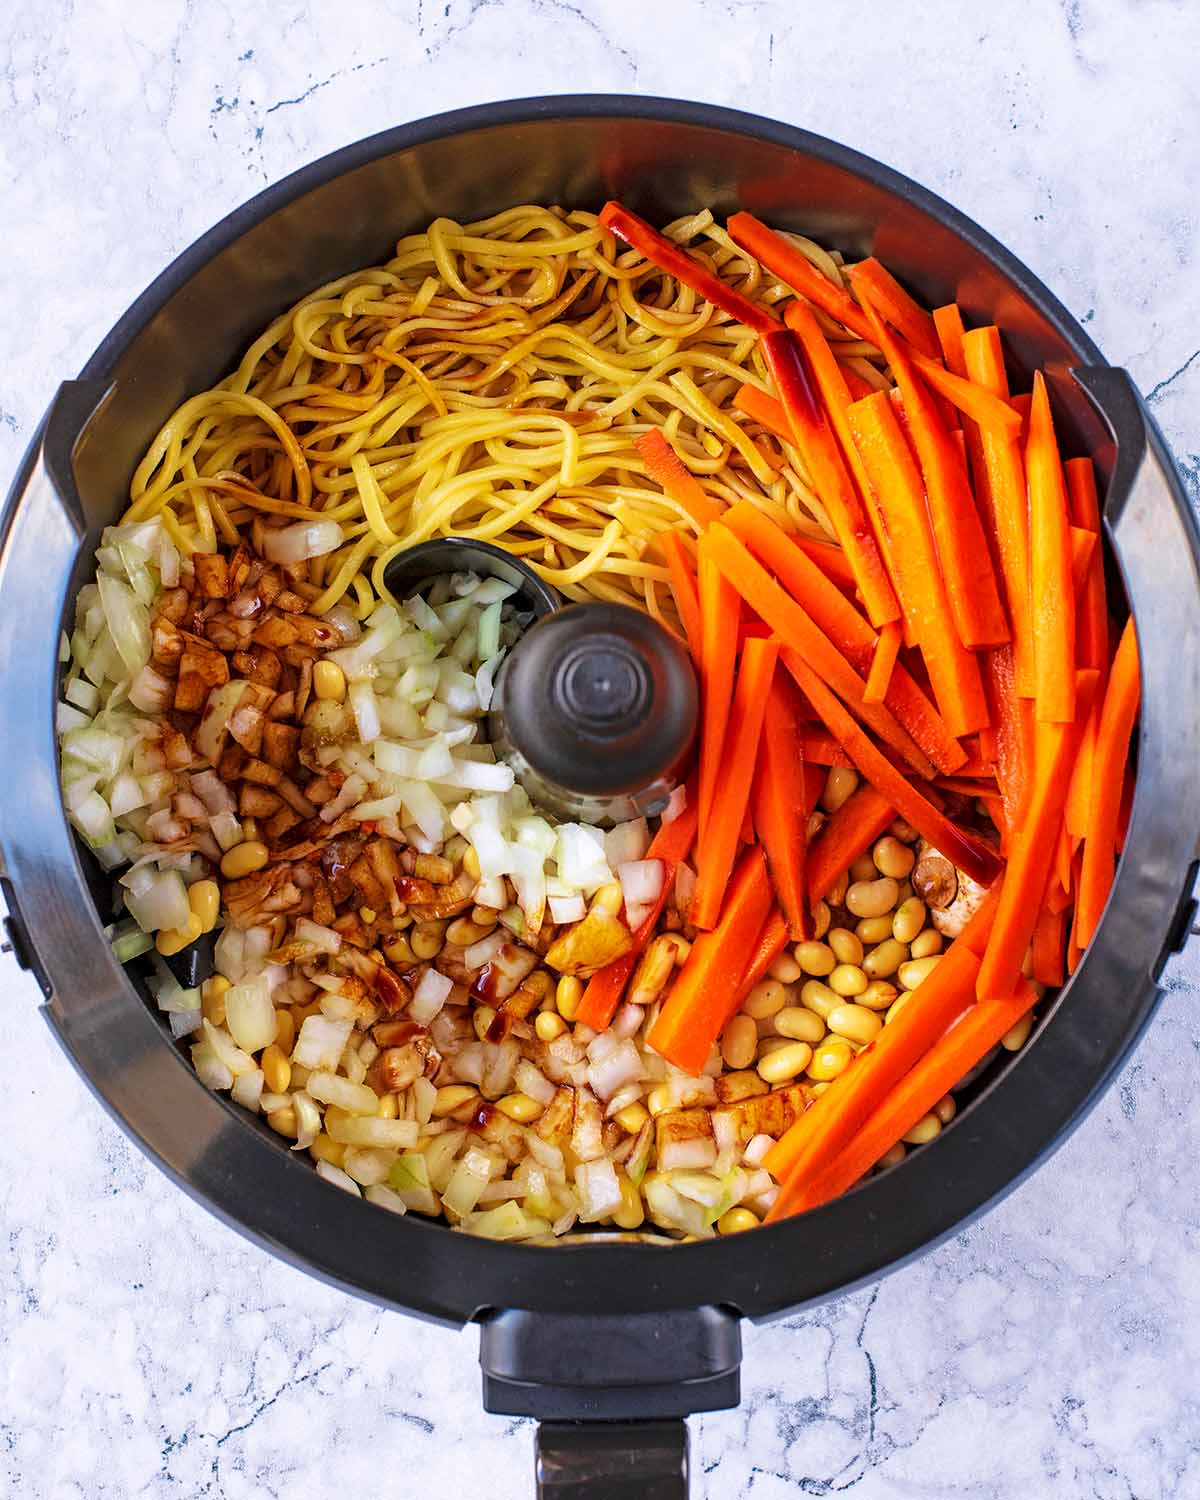 Airfryer bowl with Chinese Noodles ingredients.